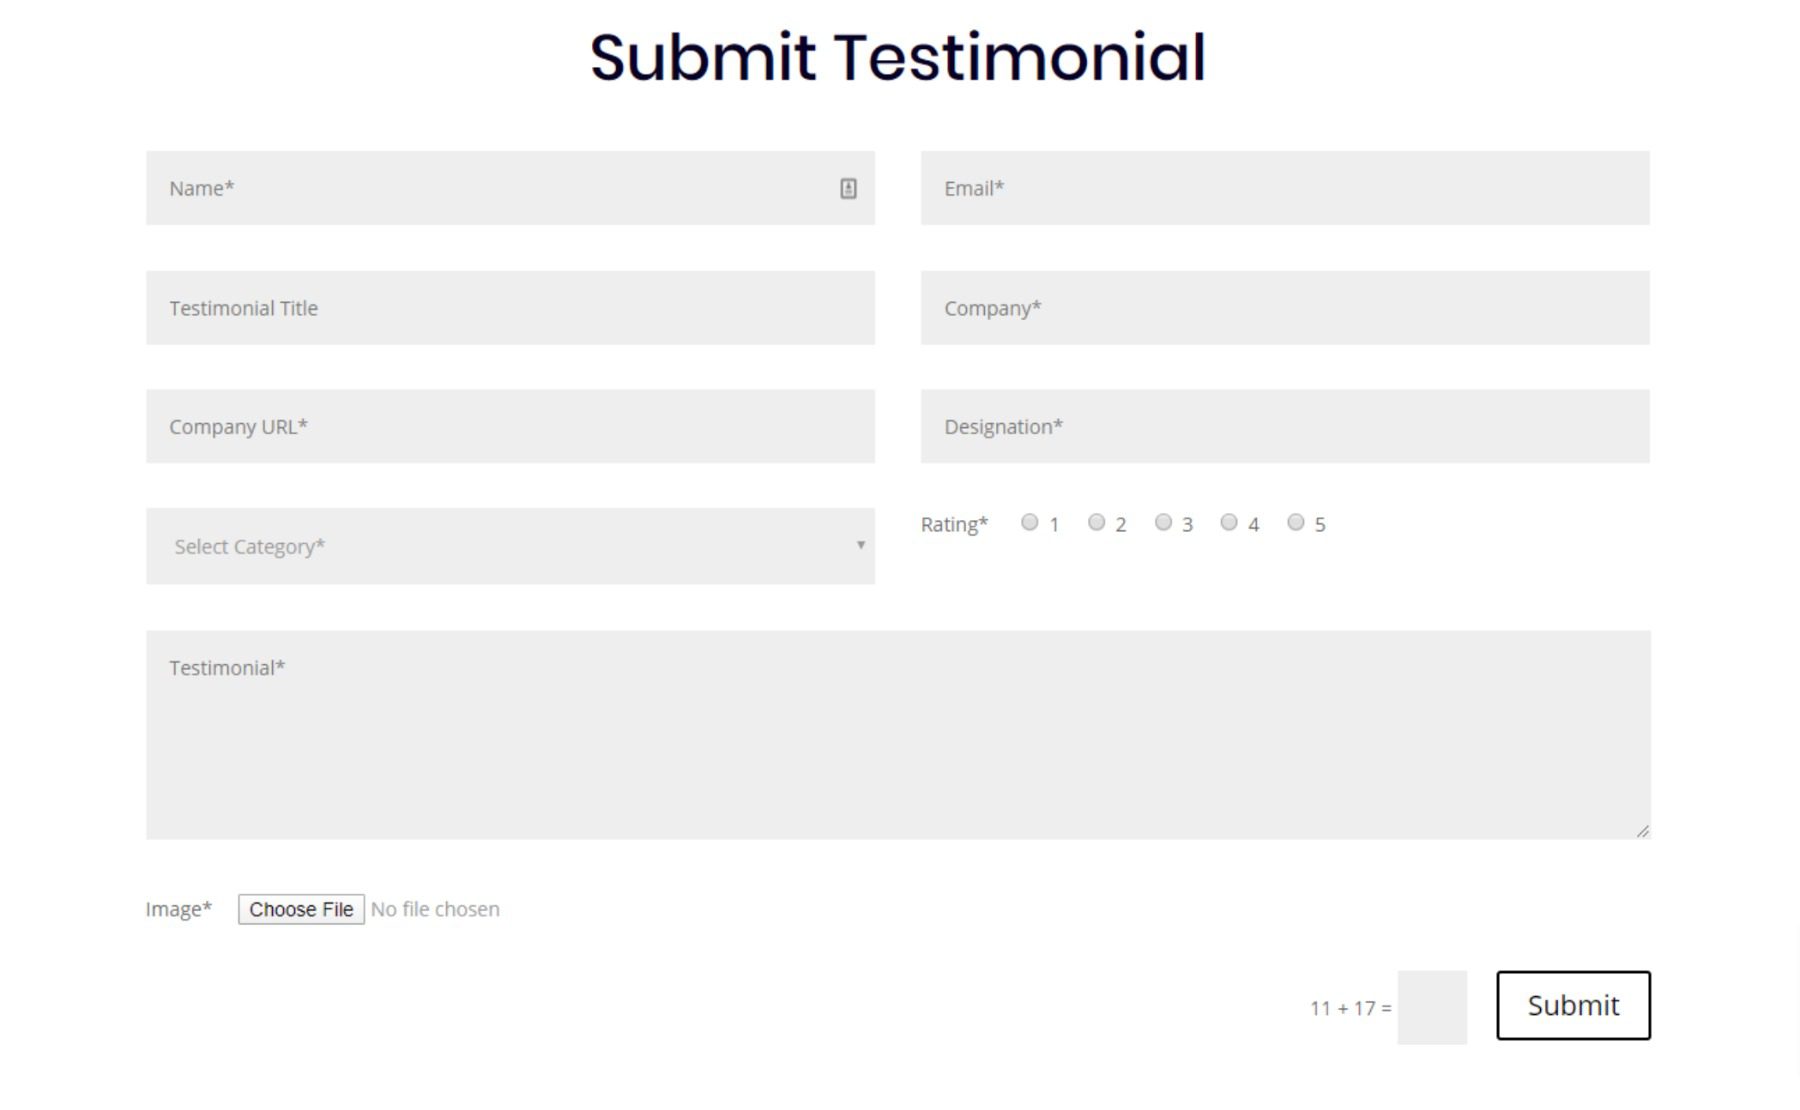 A "submit testimonial" form.